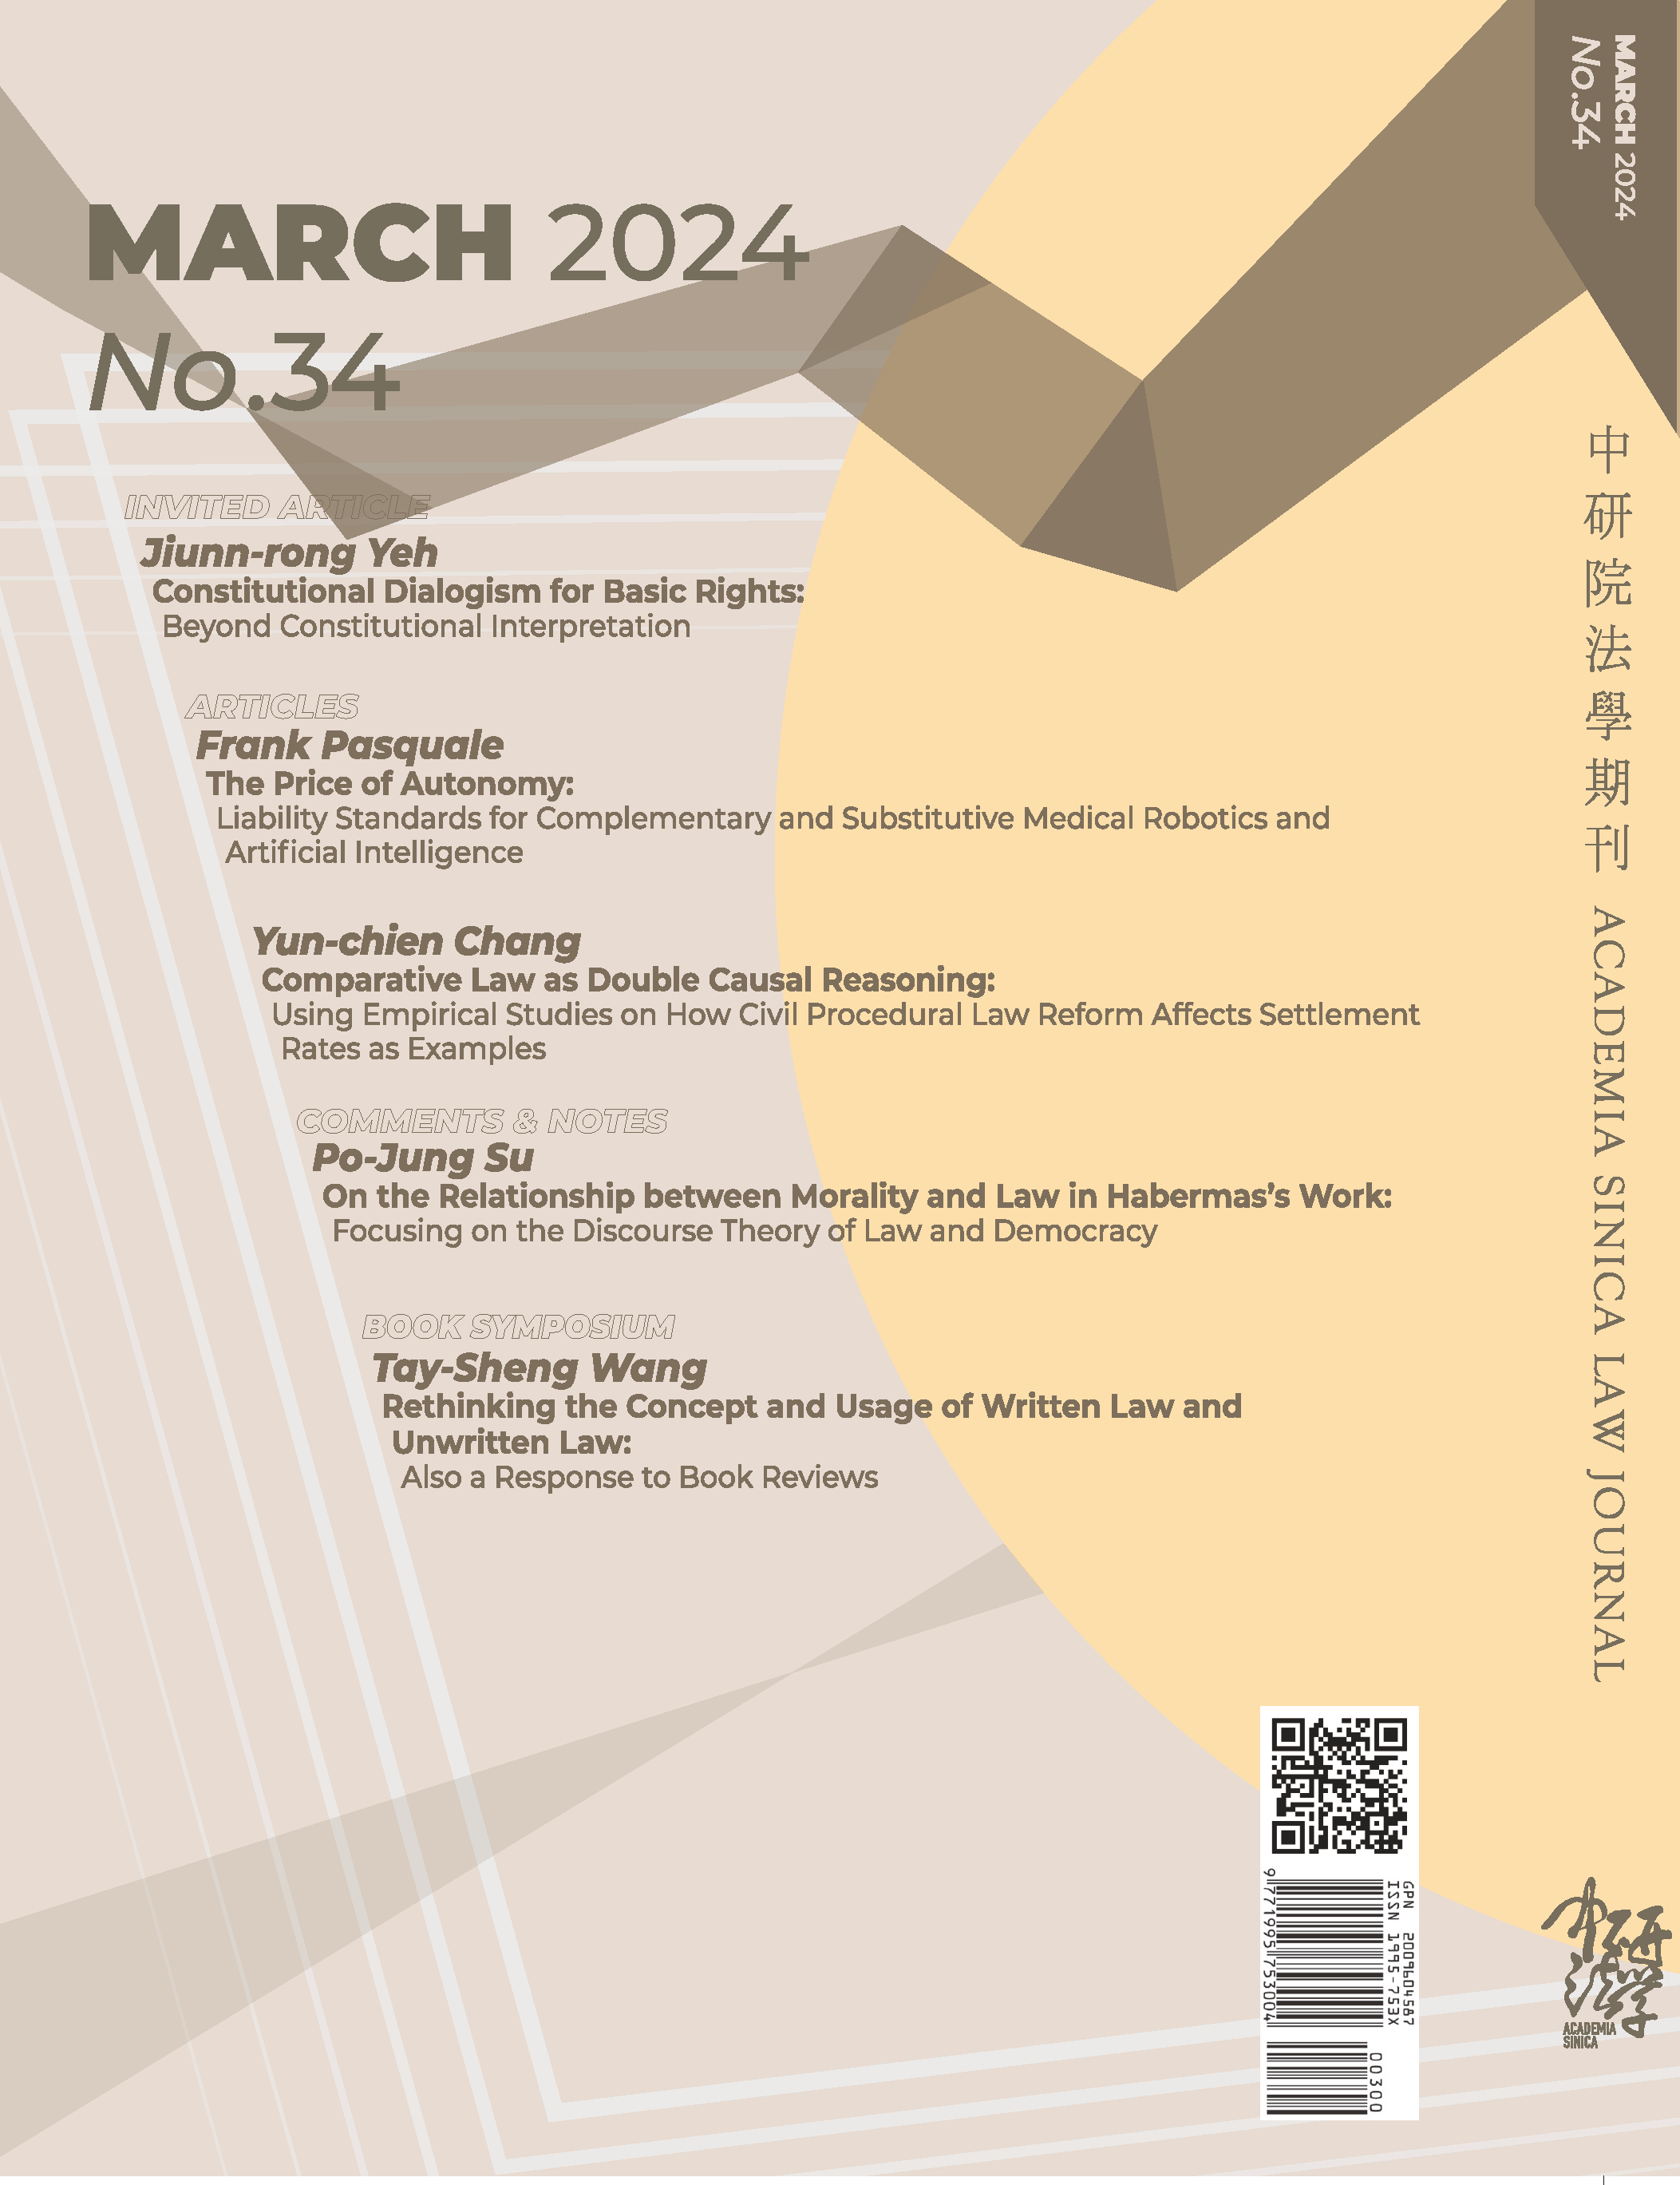 Issue No. 34 of Academia Sinica Law Journal is now available